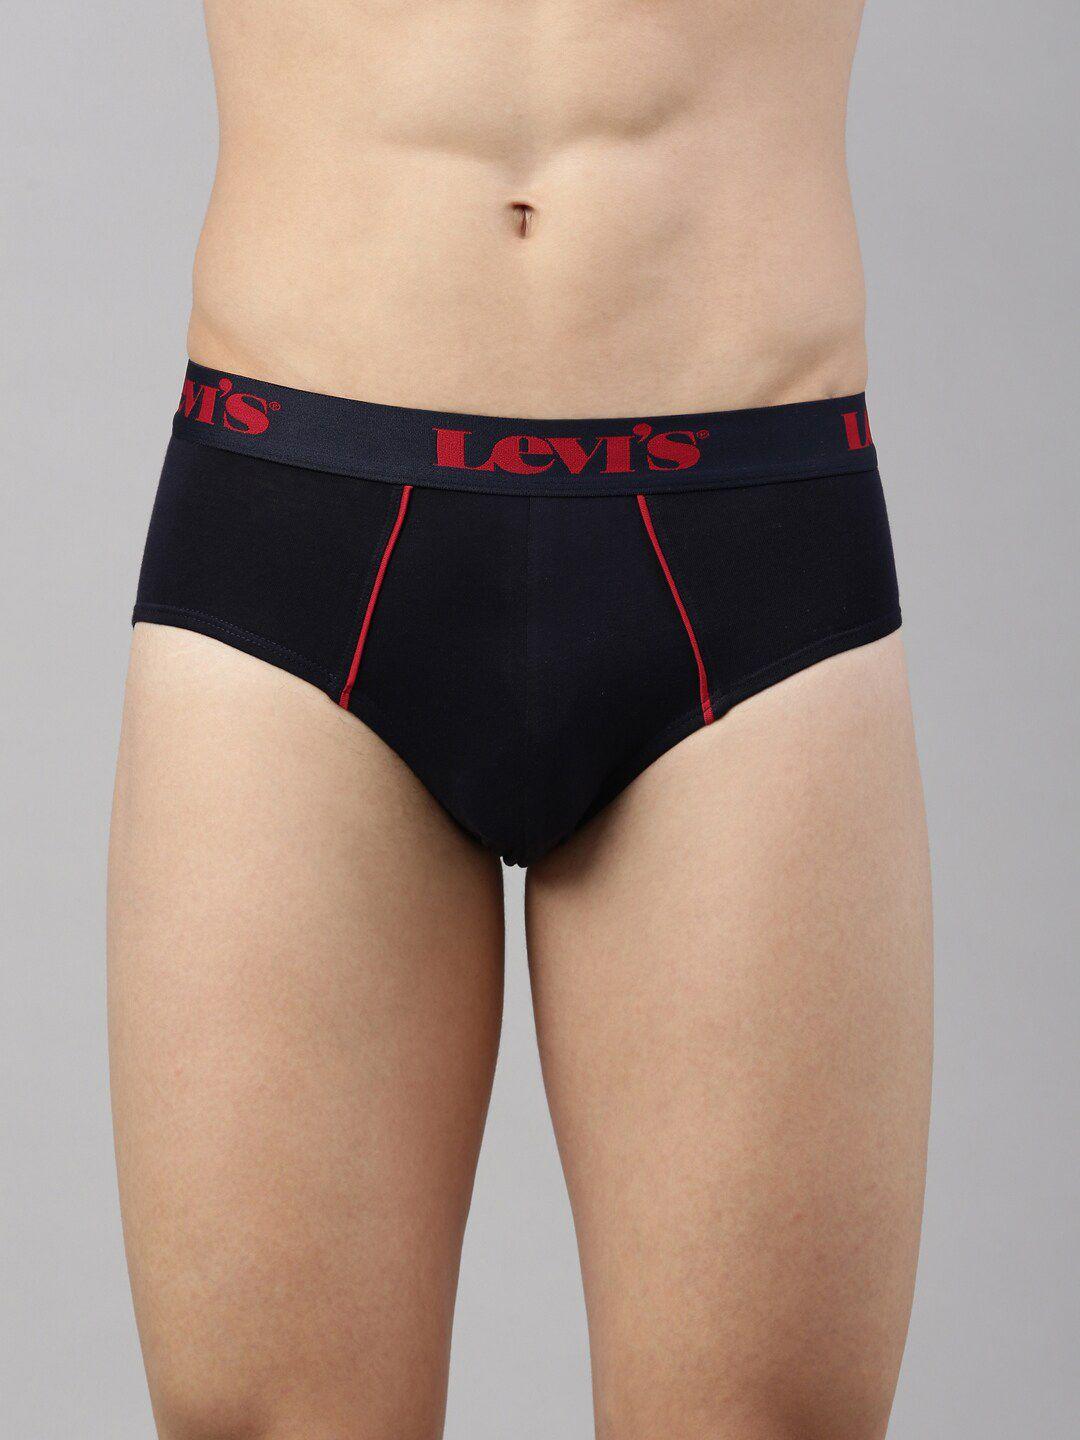 Levis Men Smartskin Technology Cotton Ultra Briefs with Tag Free Comfort-065